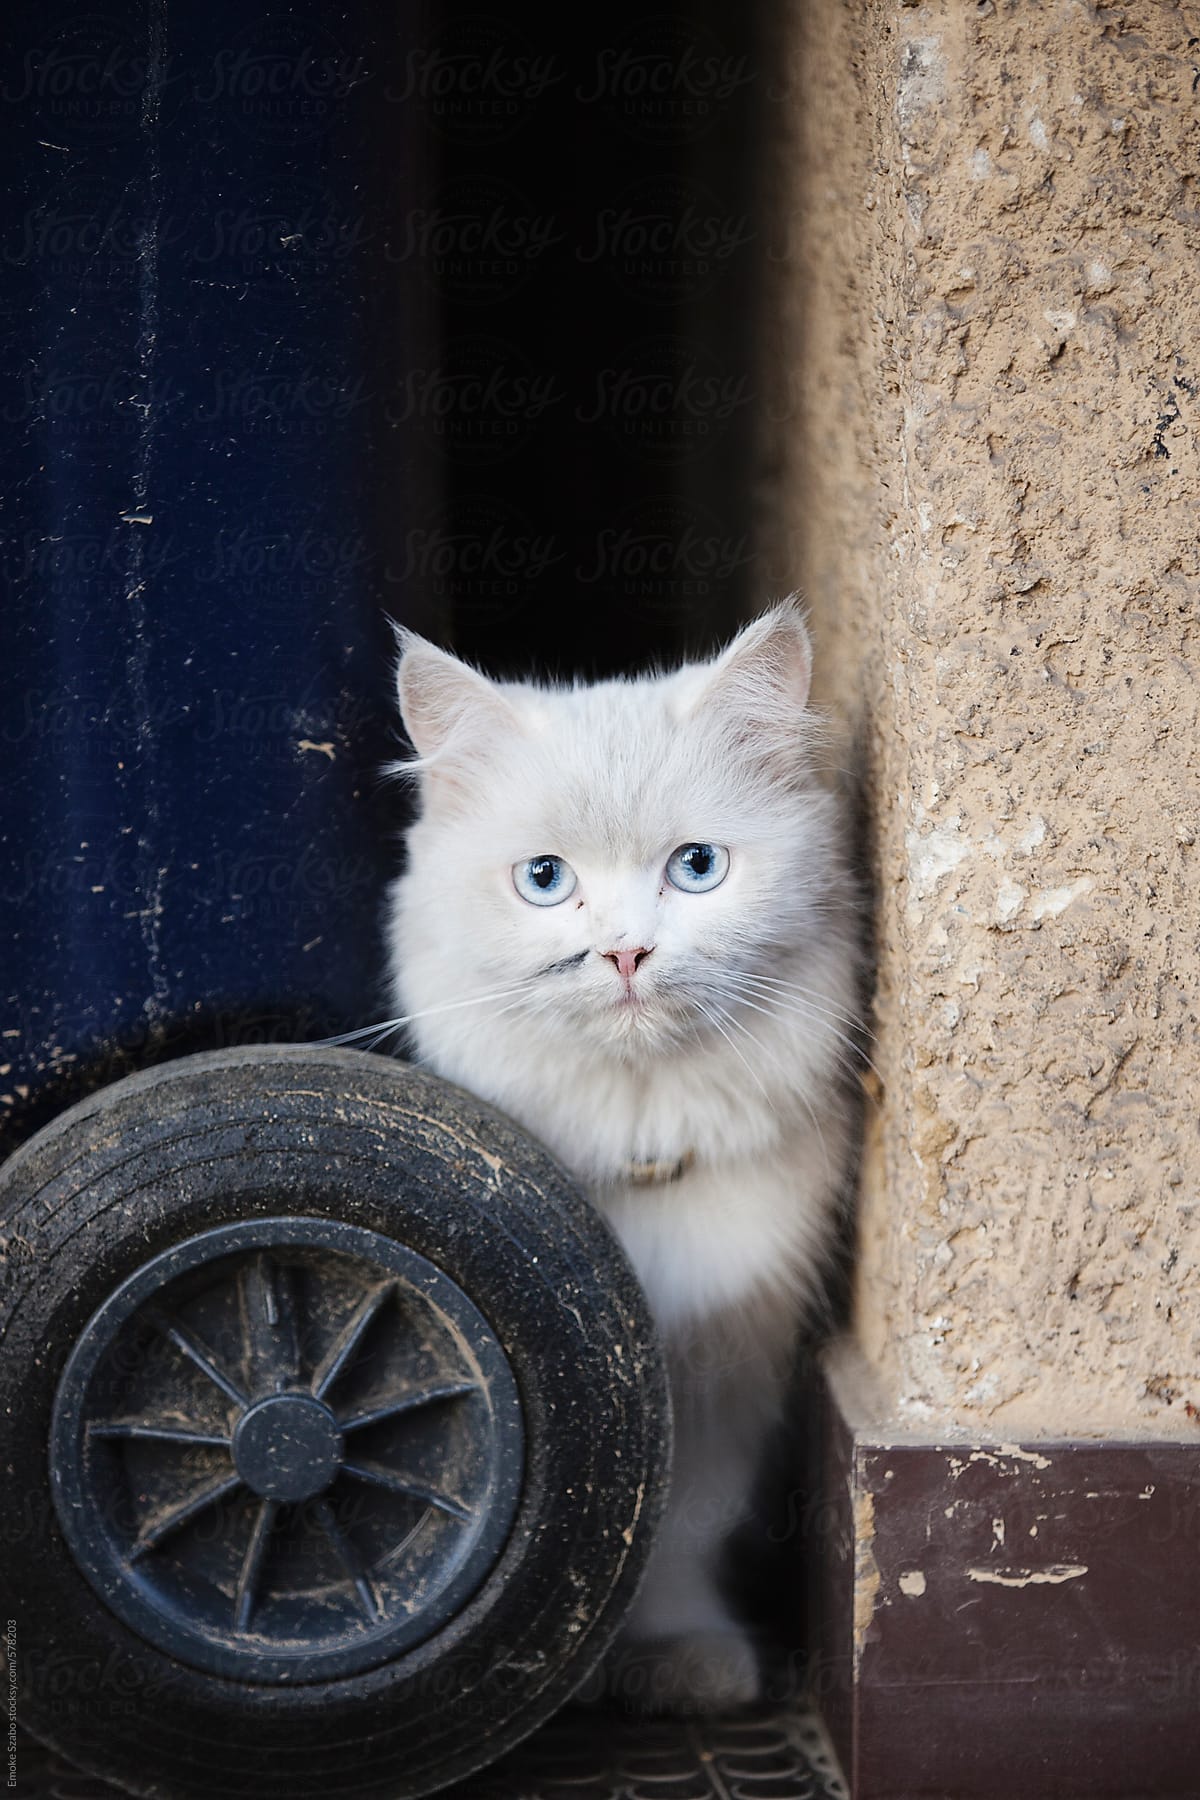 White fluffy cat with blue eyes